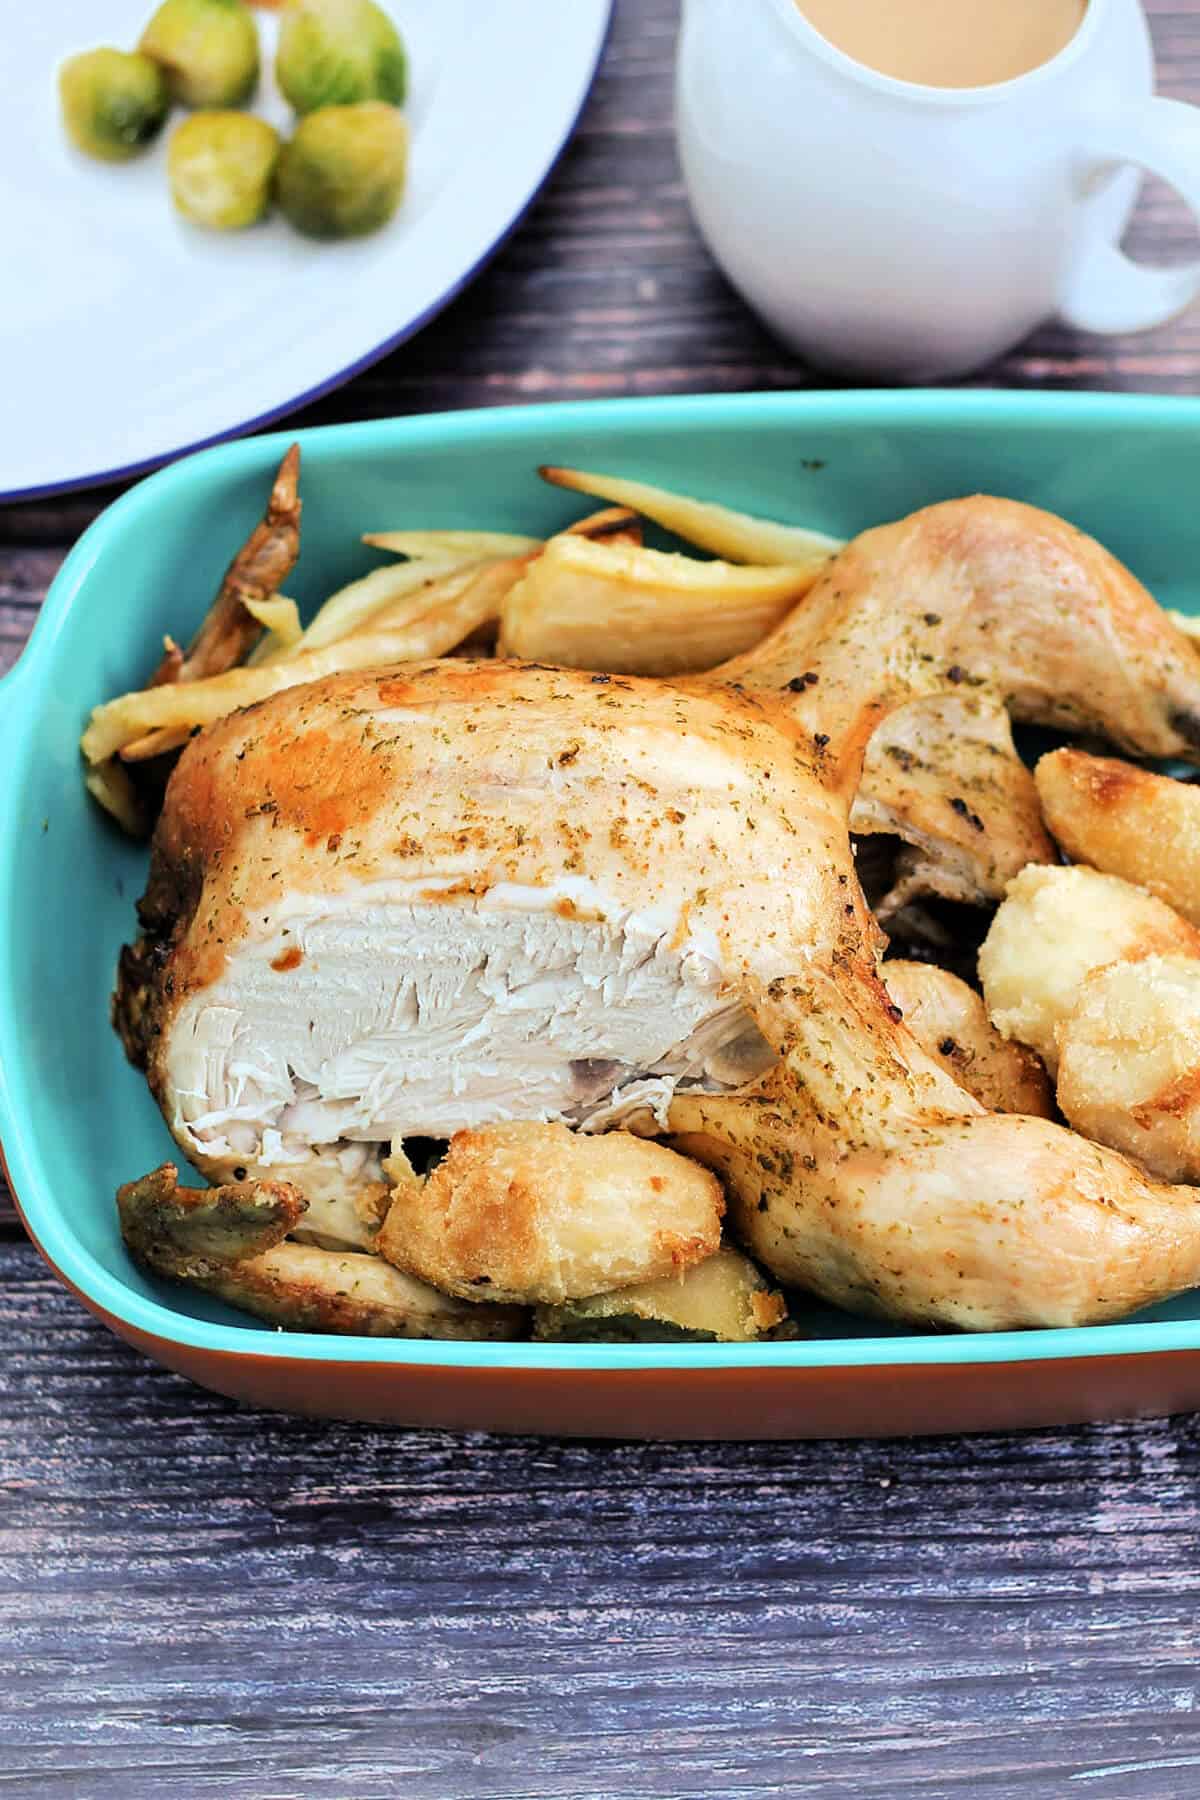 Roast chicken with roast potatoes and parsnips in a serving dish on a table.